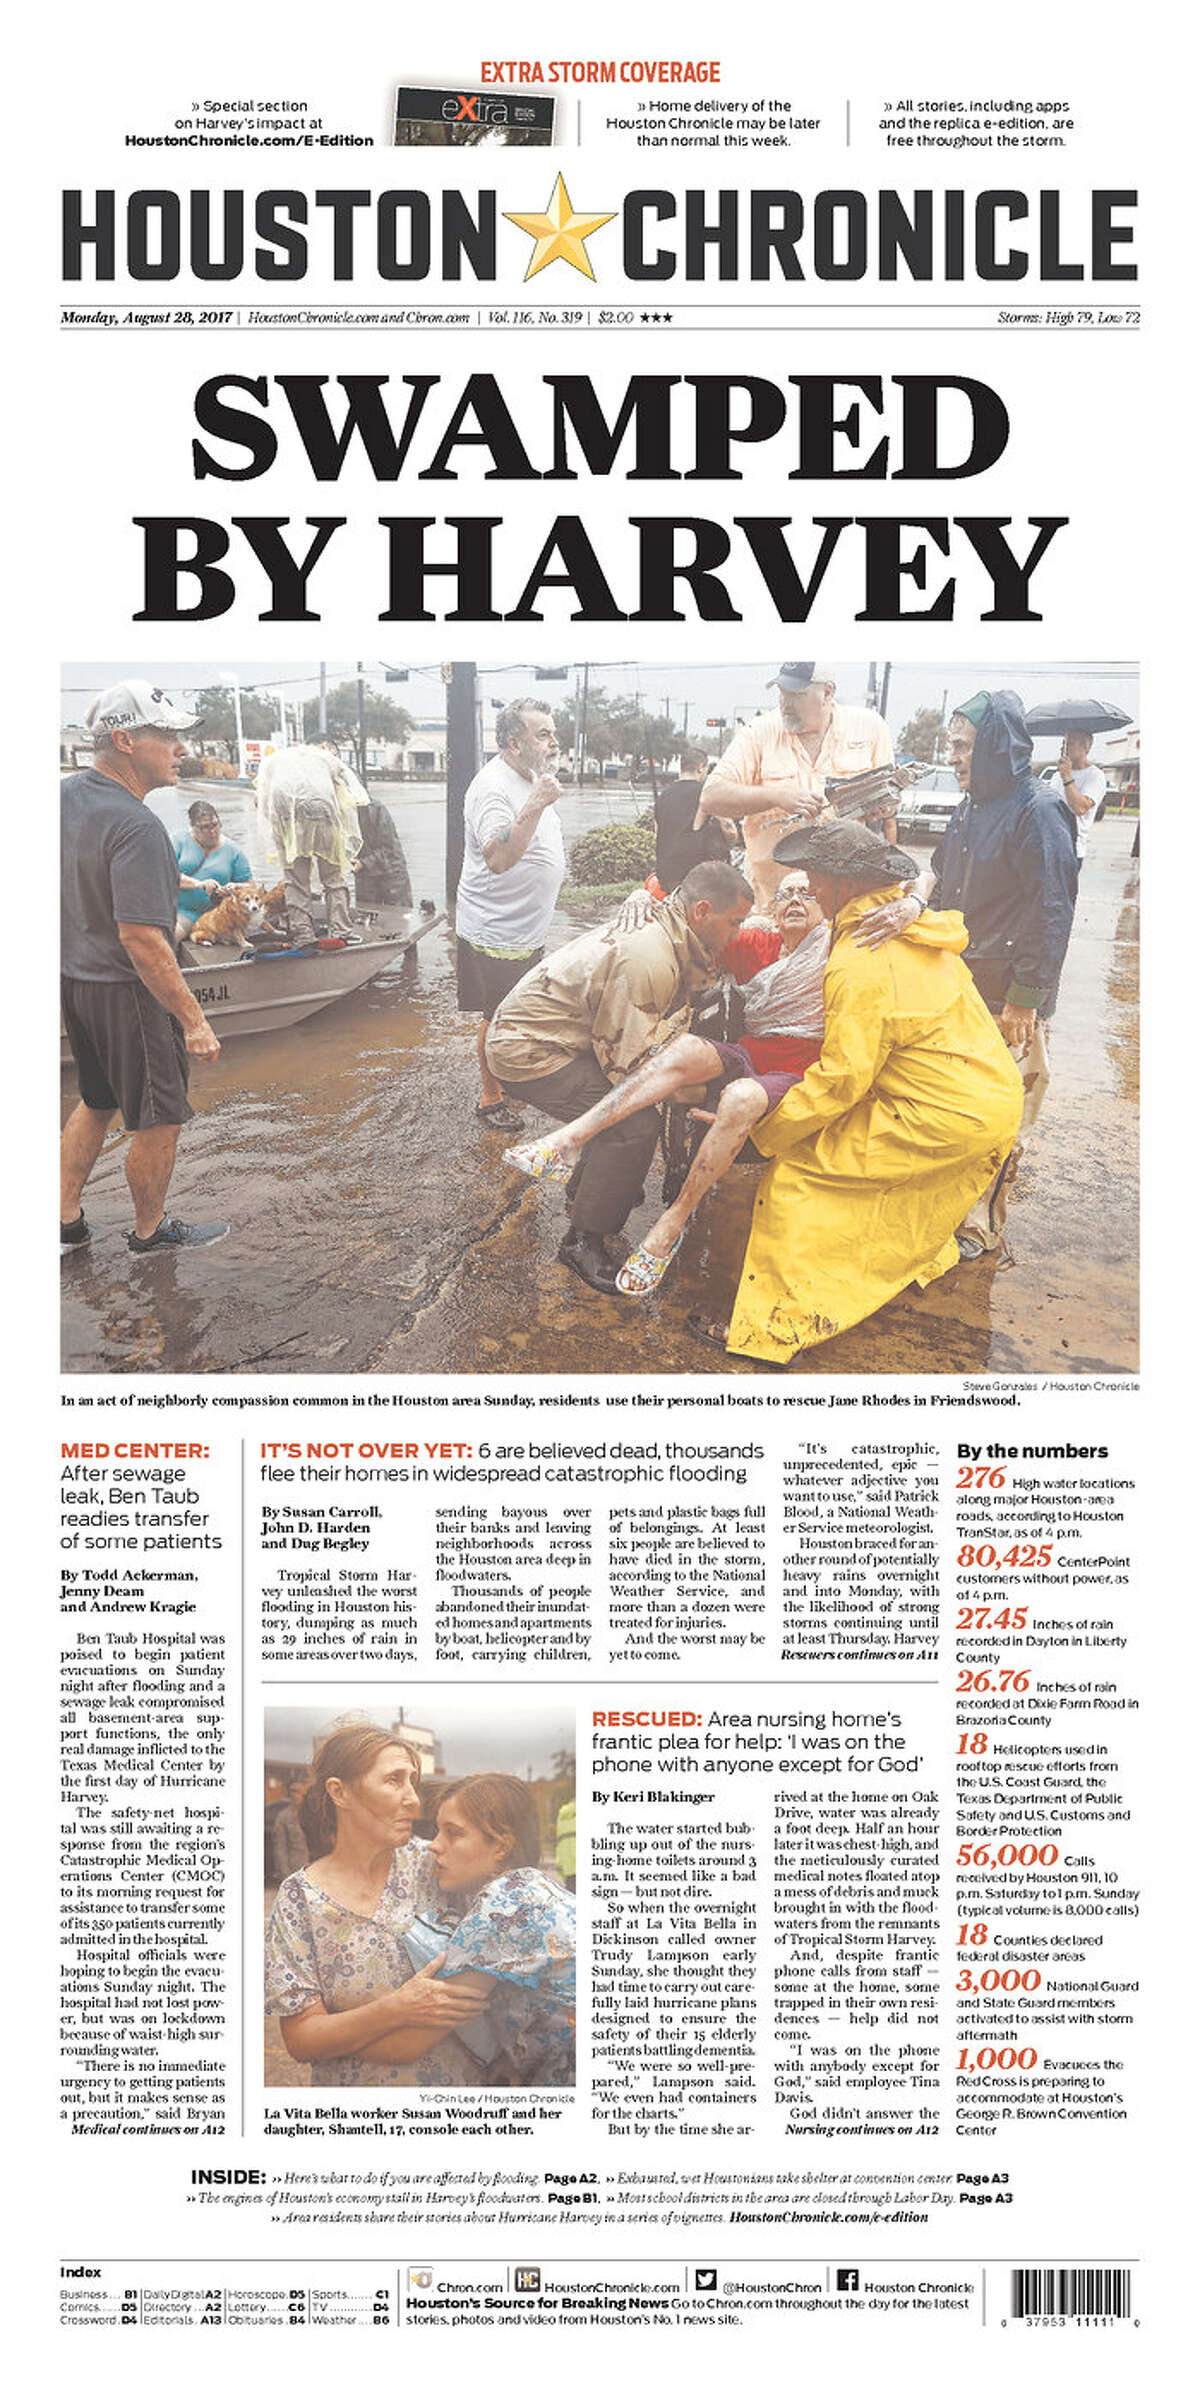 Houston Chronicle: Houston, Texas Front pages from Texas and beyond for Monday, Aug. 28, 2017, show how newspapers covered the catastrophic floods in Houston due to Tropical Storm Harvey.